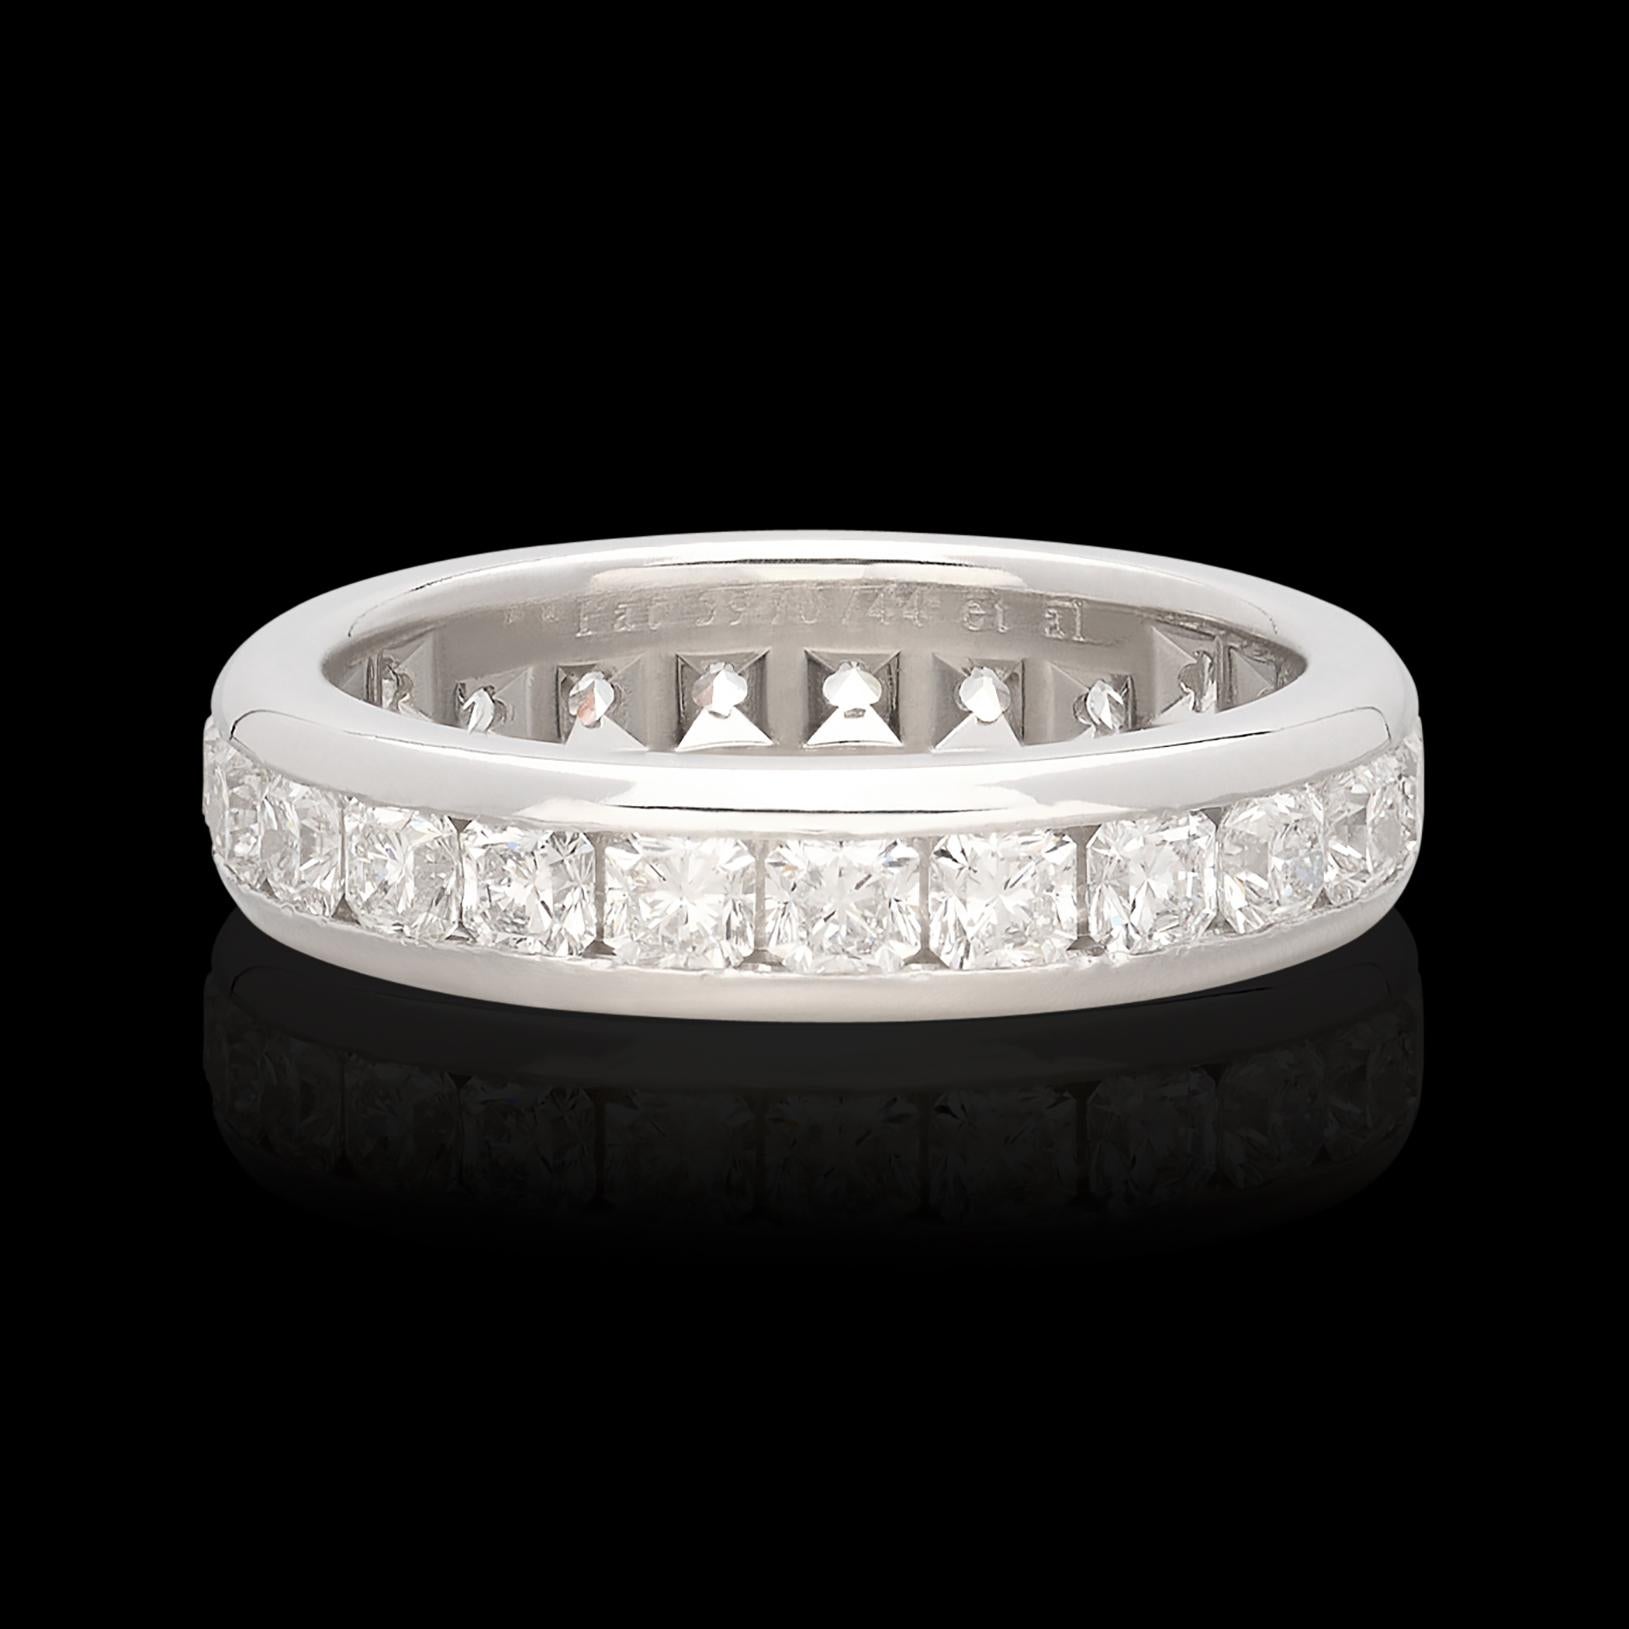 Of all the Tiffany wedding rings, perhaps the Lucida ring is their most beautiful. Classic and elegant, this Tiffany & Co band ring features 22 extremely well matched Radiant Cut diamonds channel set in a platinum ring size 7 1/2 (inquire regarding